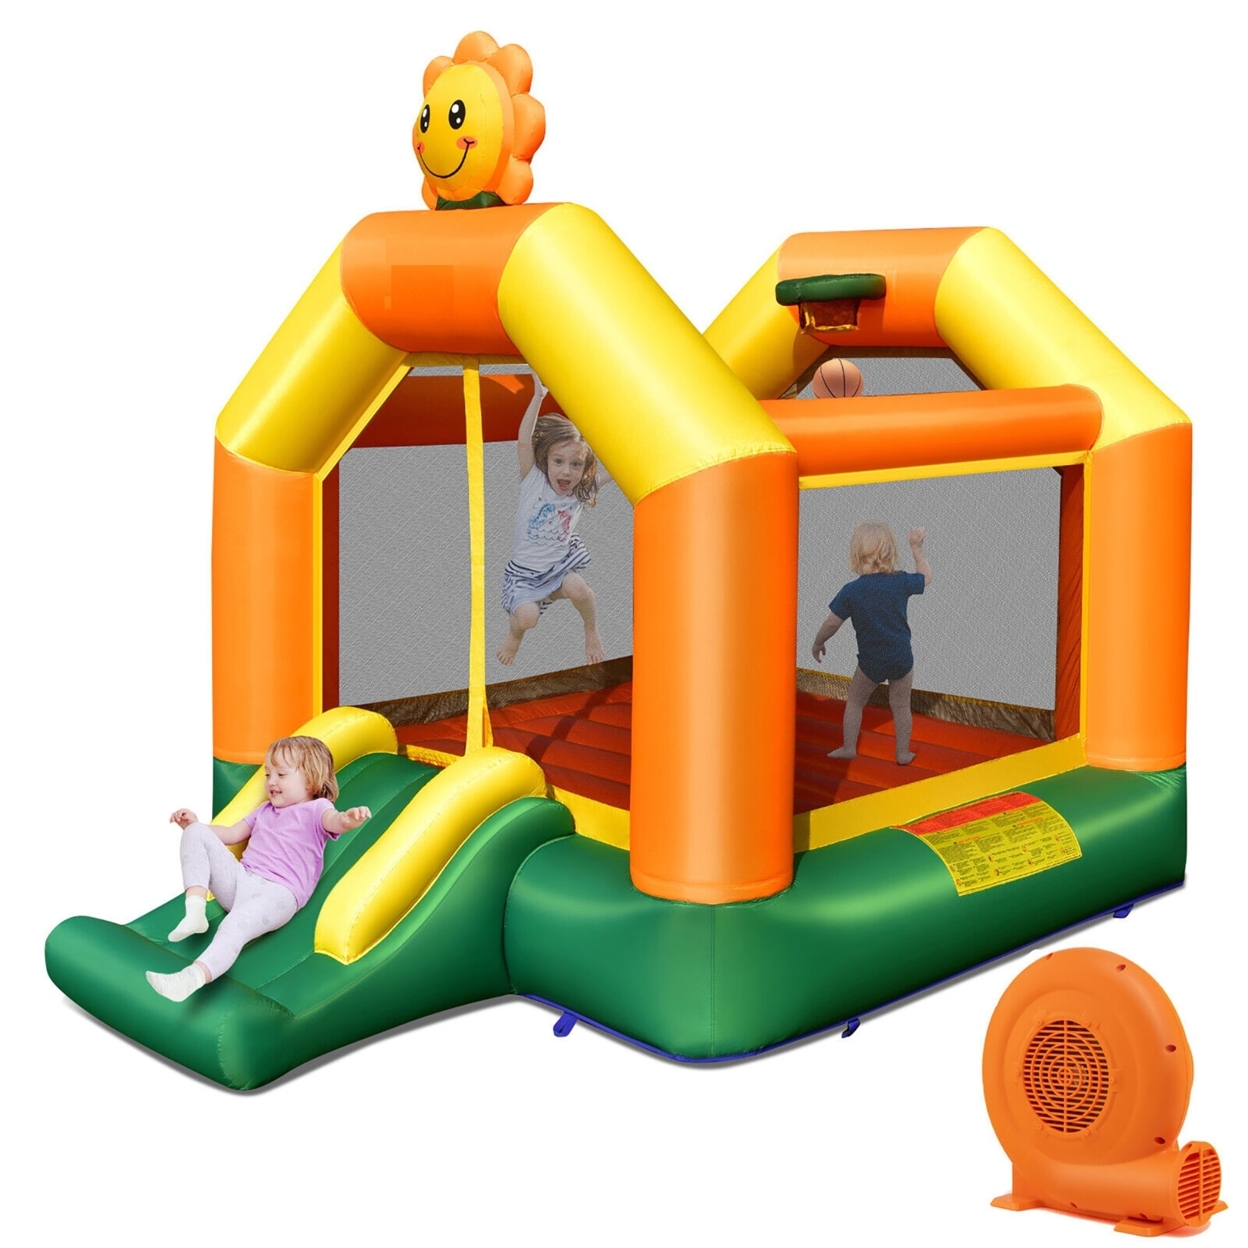 Inflatable Bounce Castle Jumping House Kids Playhouse W/ Slide & 750W Blower